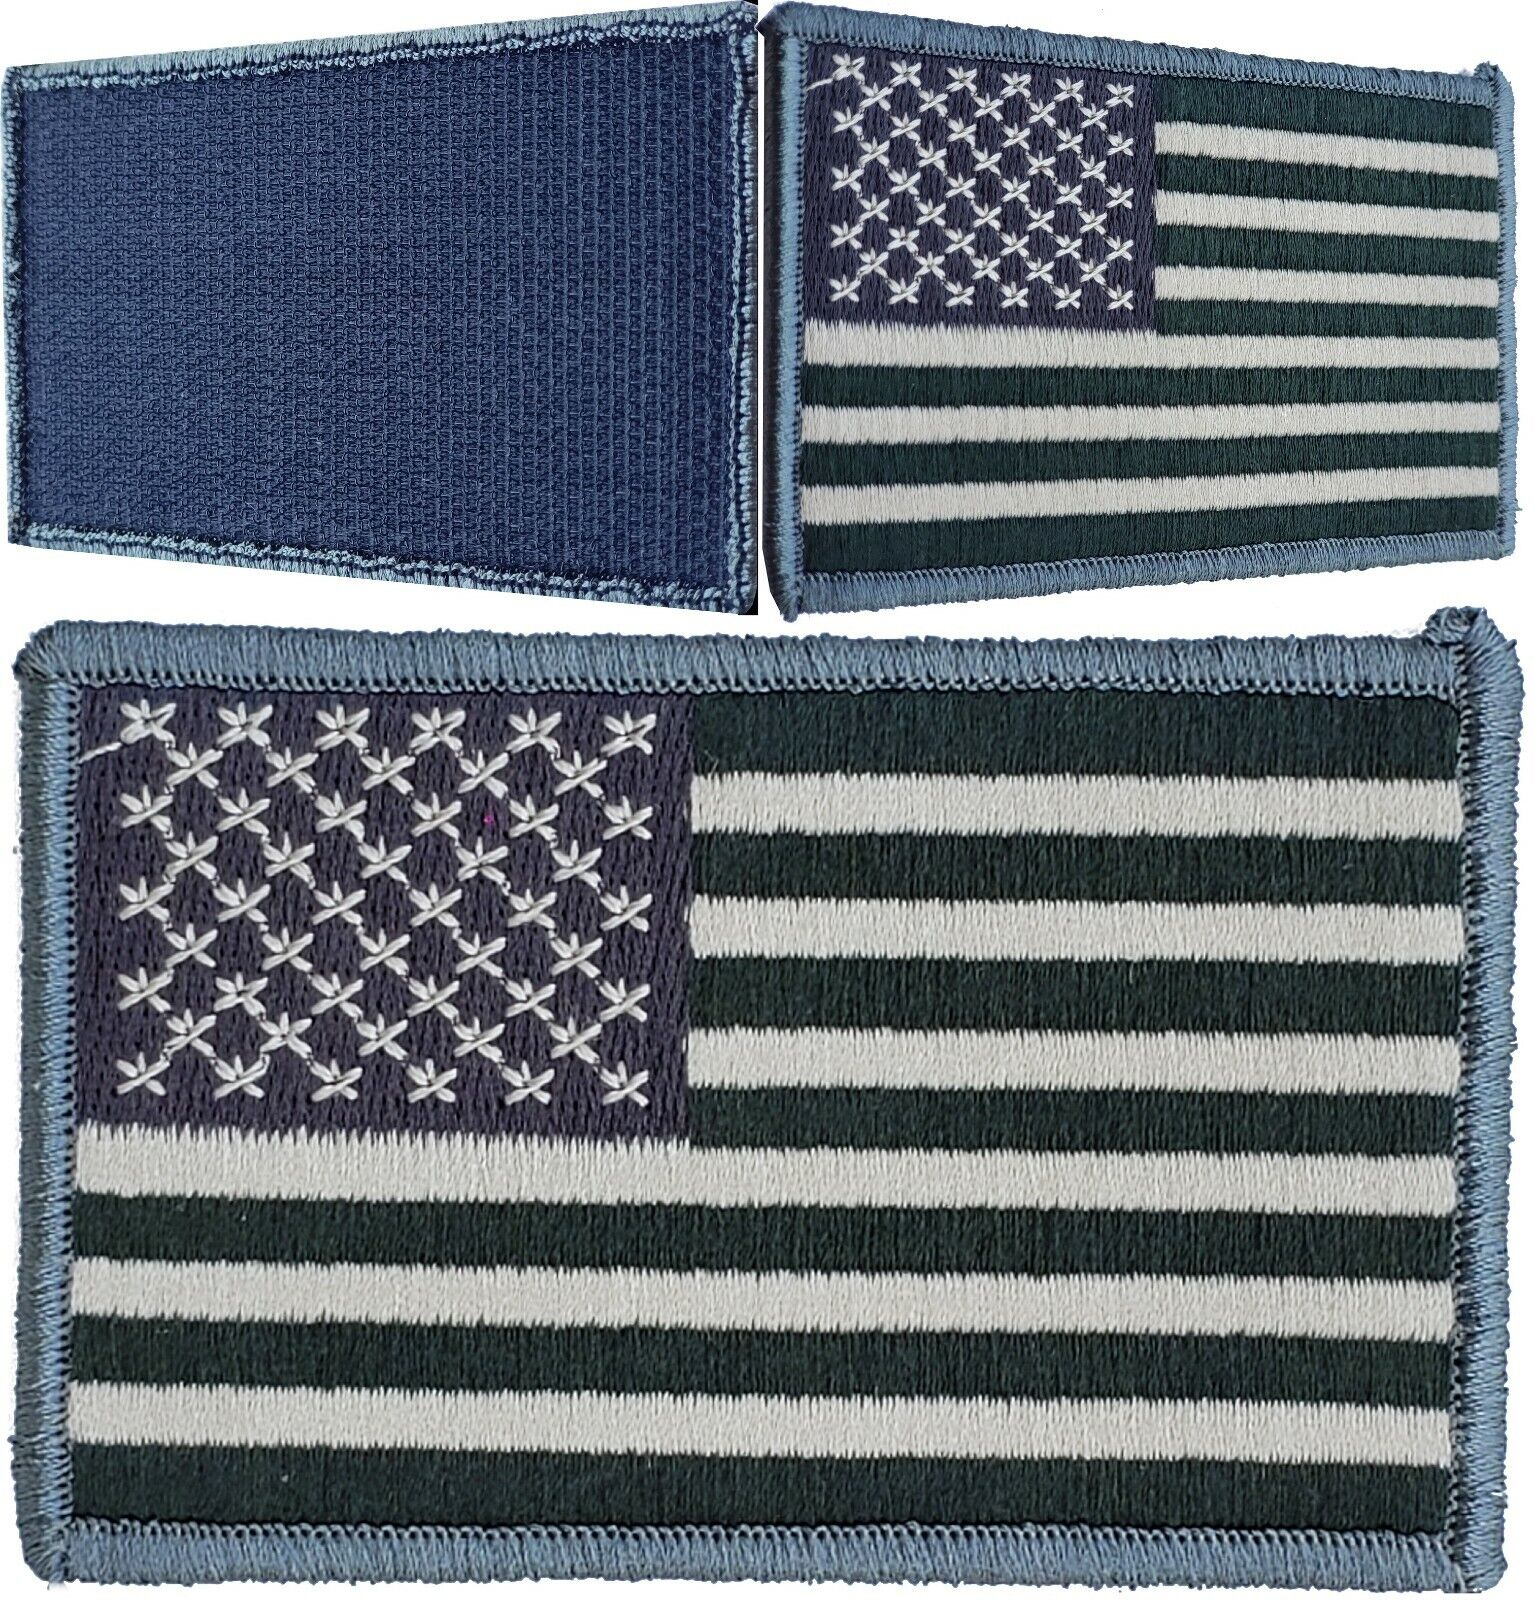 AMERICAN FLAG TACTICAL US ARMY MORALE MILITARY BADGE ACU LIGHT HOOK FASTEN PATCH